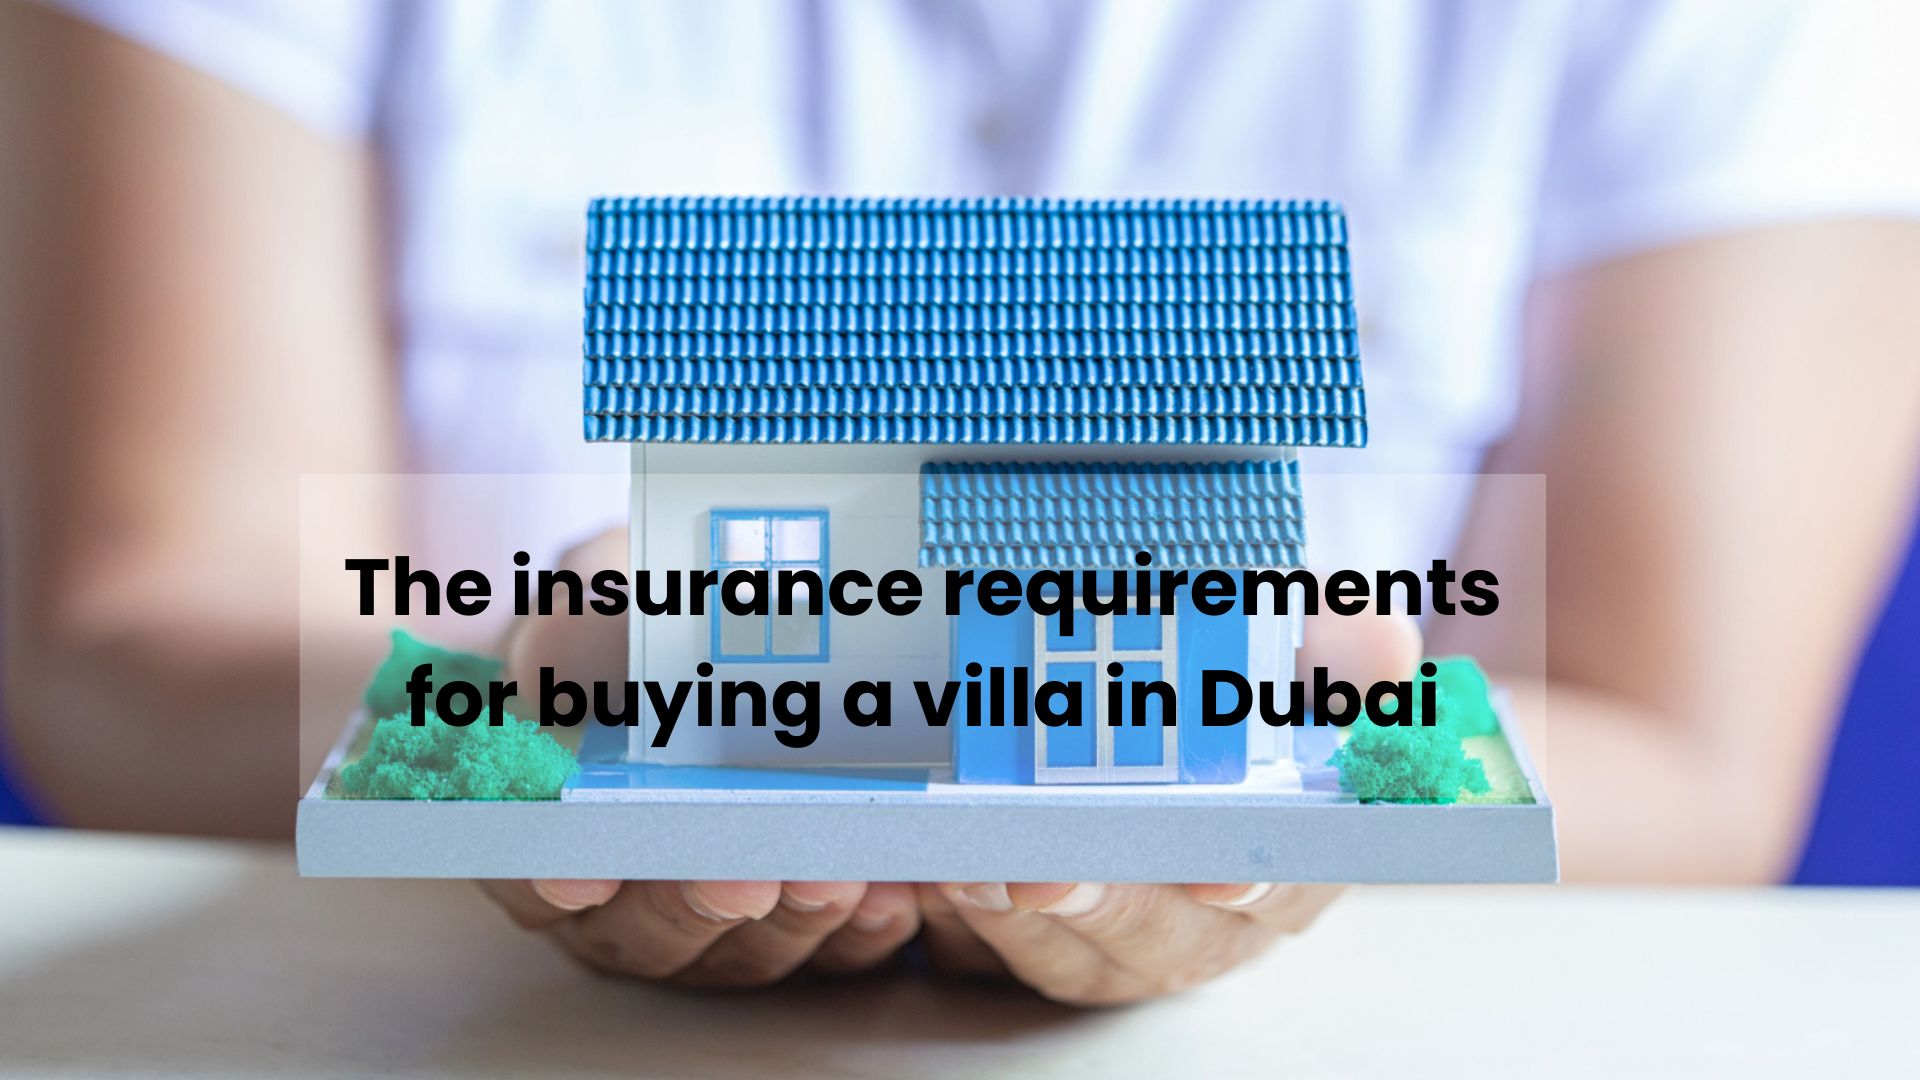 The insurance requirements for buying a villa in Dubai